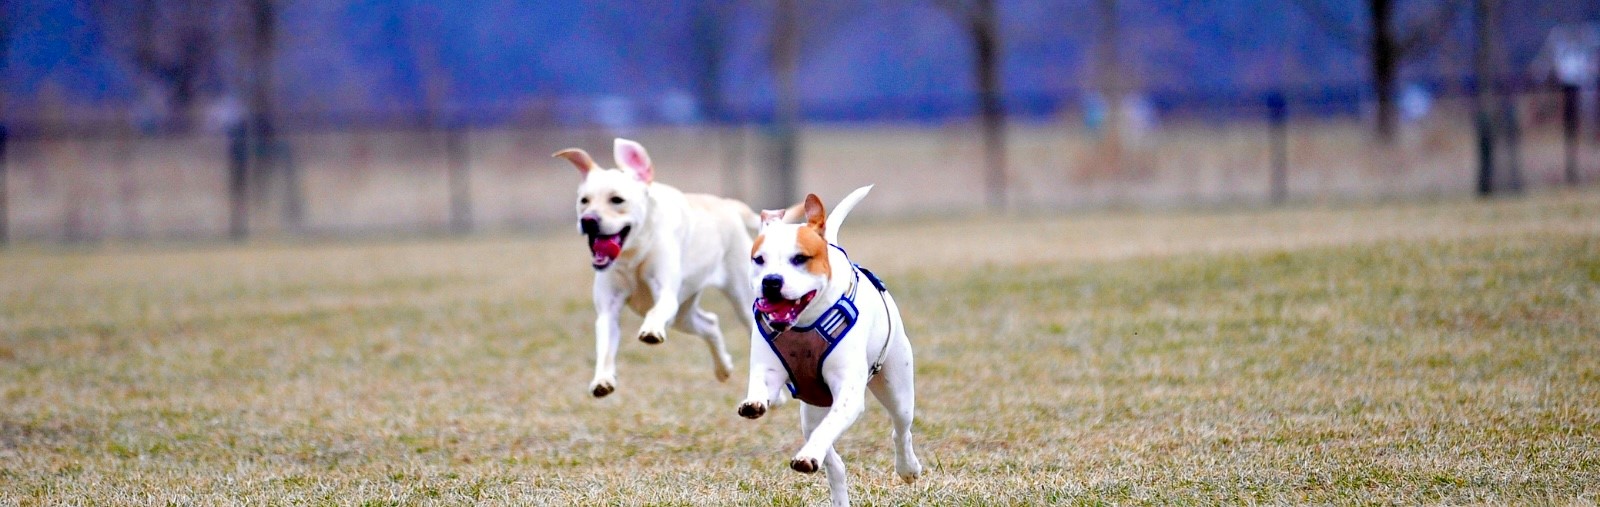 Happy dogs running at the park